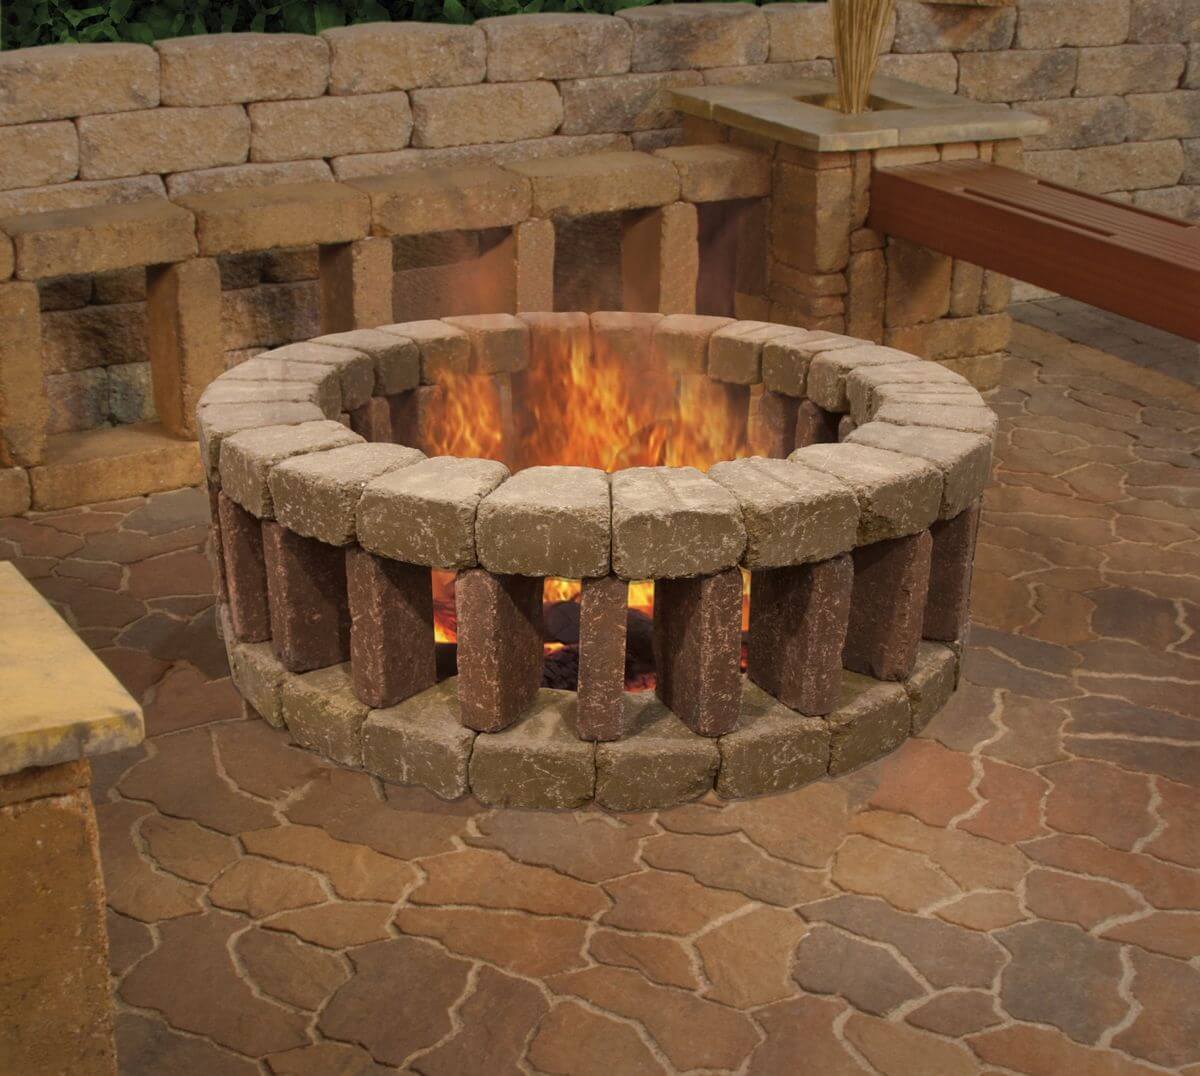 How To Build A Brick Fire Pit Without Mortar